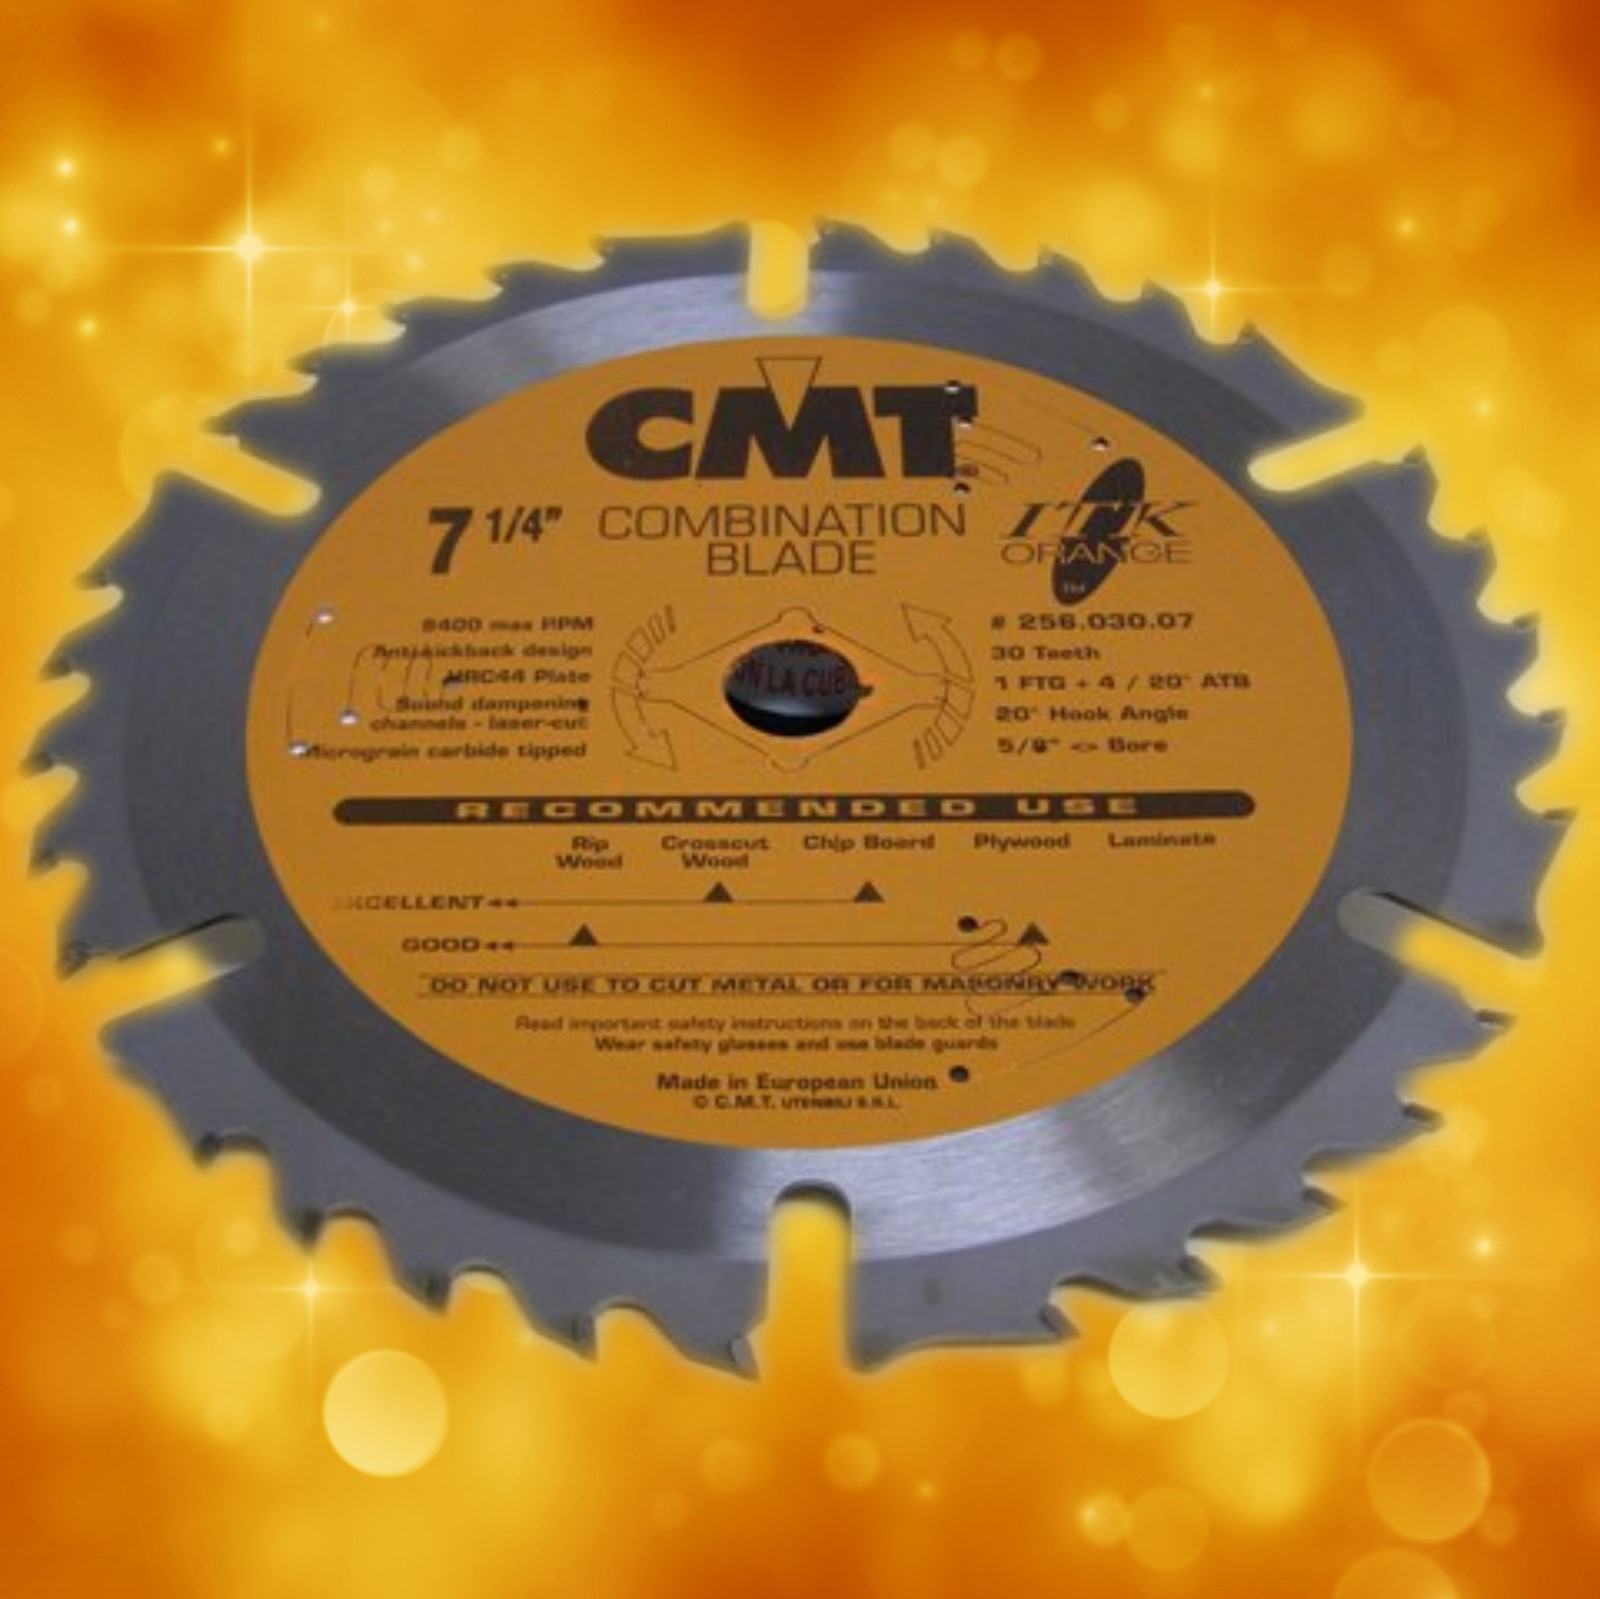 CMT 7.25" ITK Combination Saw Blade 256.030.07 